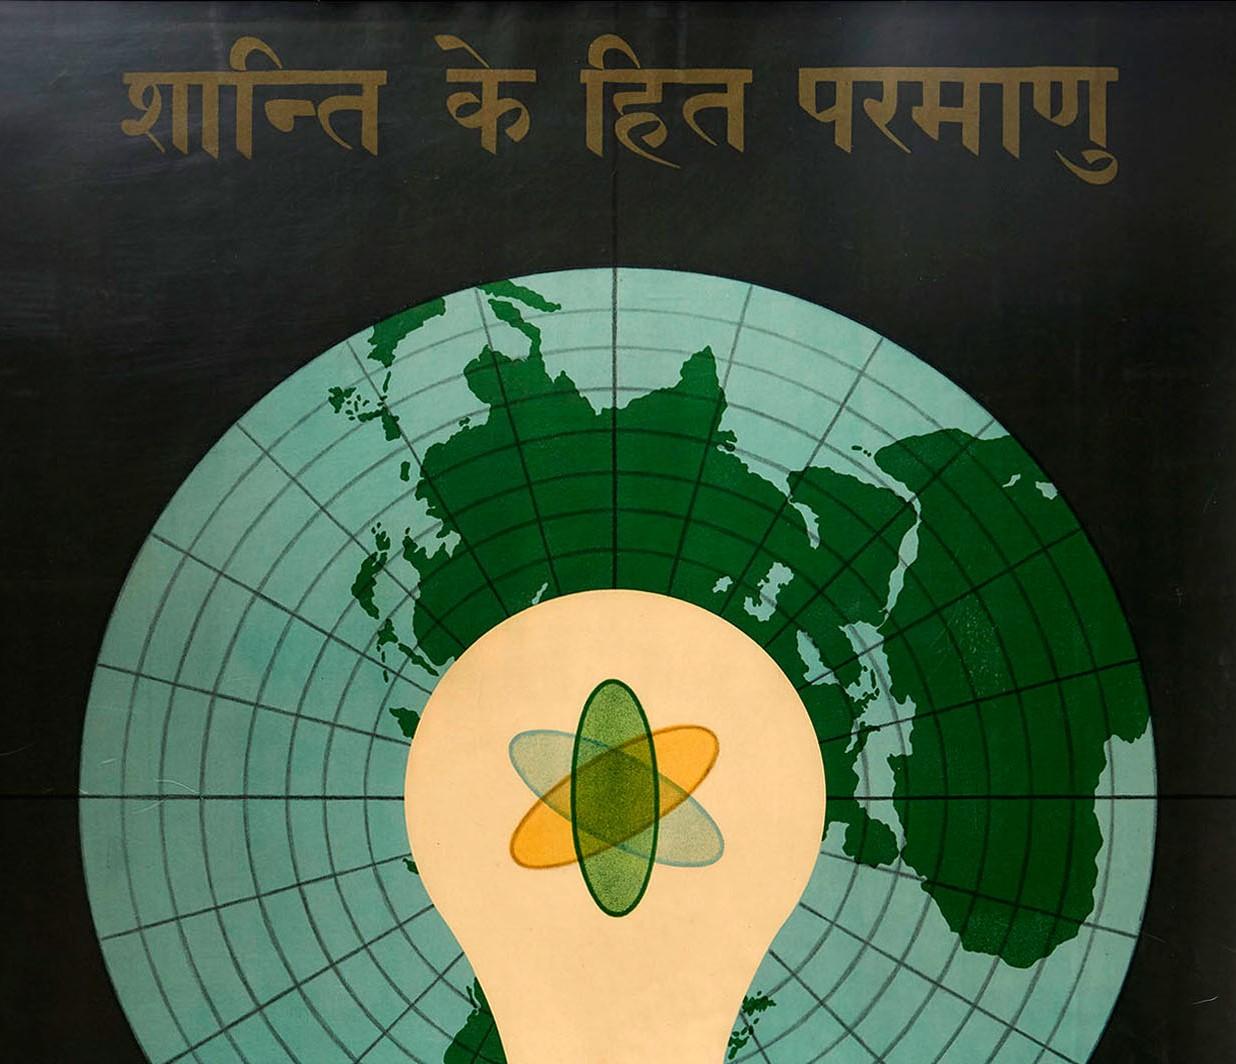 Original vintage General Dynamics poster by the illustrator, typographer and graphic designer Erik Nitsche (1908-1998) promoting Electrodynamics. Great illustration featuring the atom symbol inside a light bulb in front of a globe map of the world